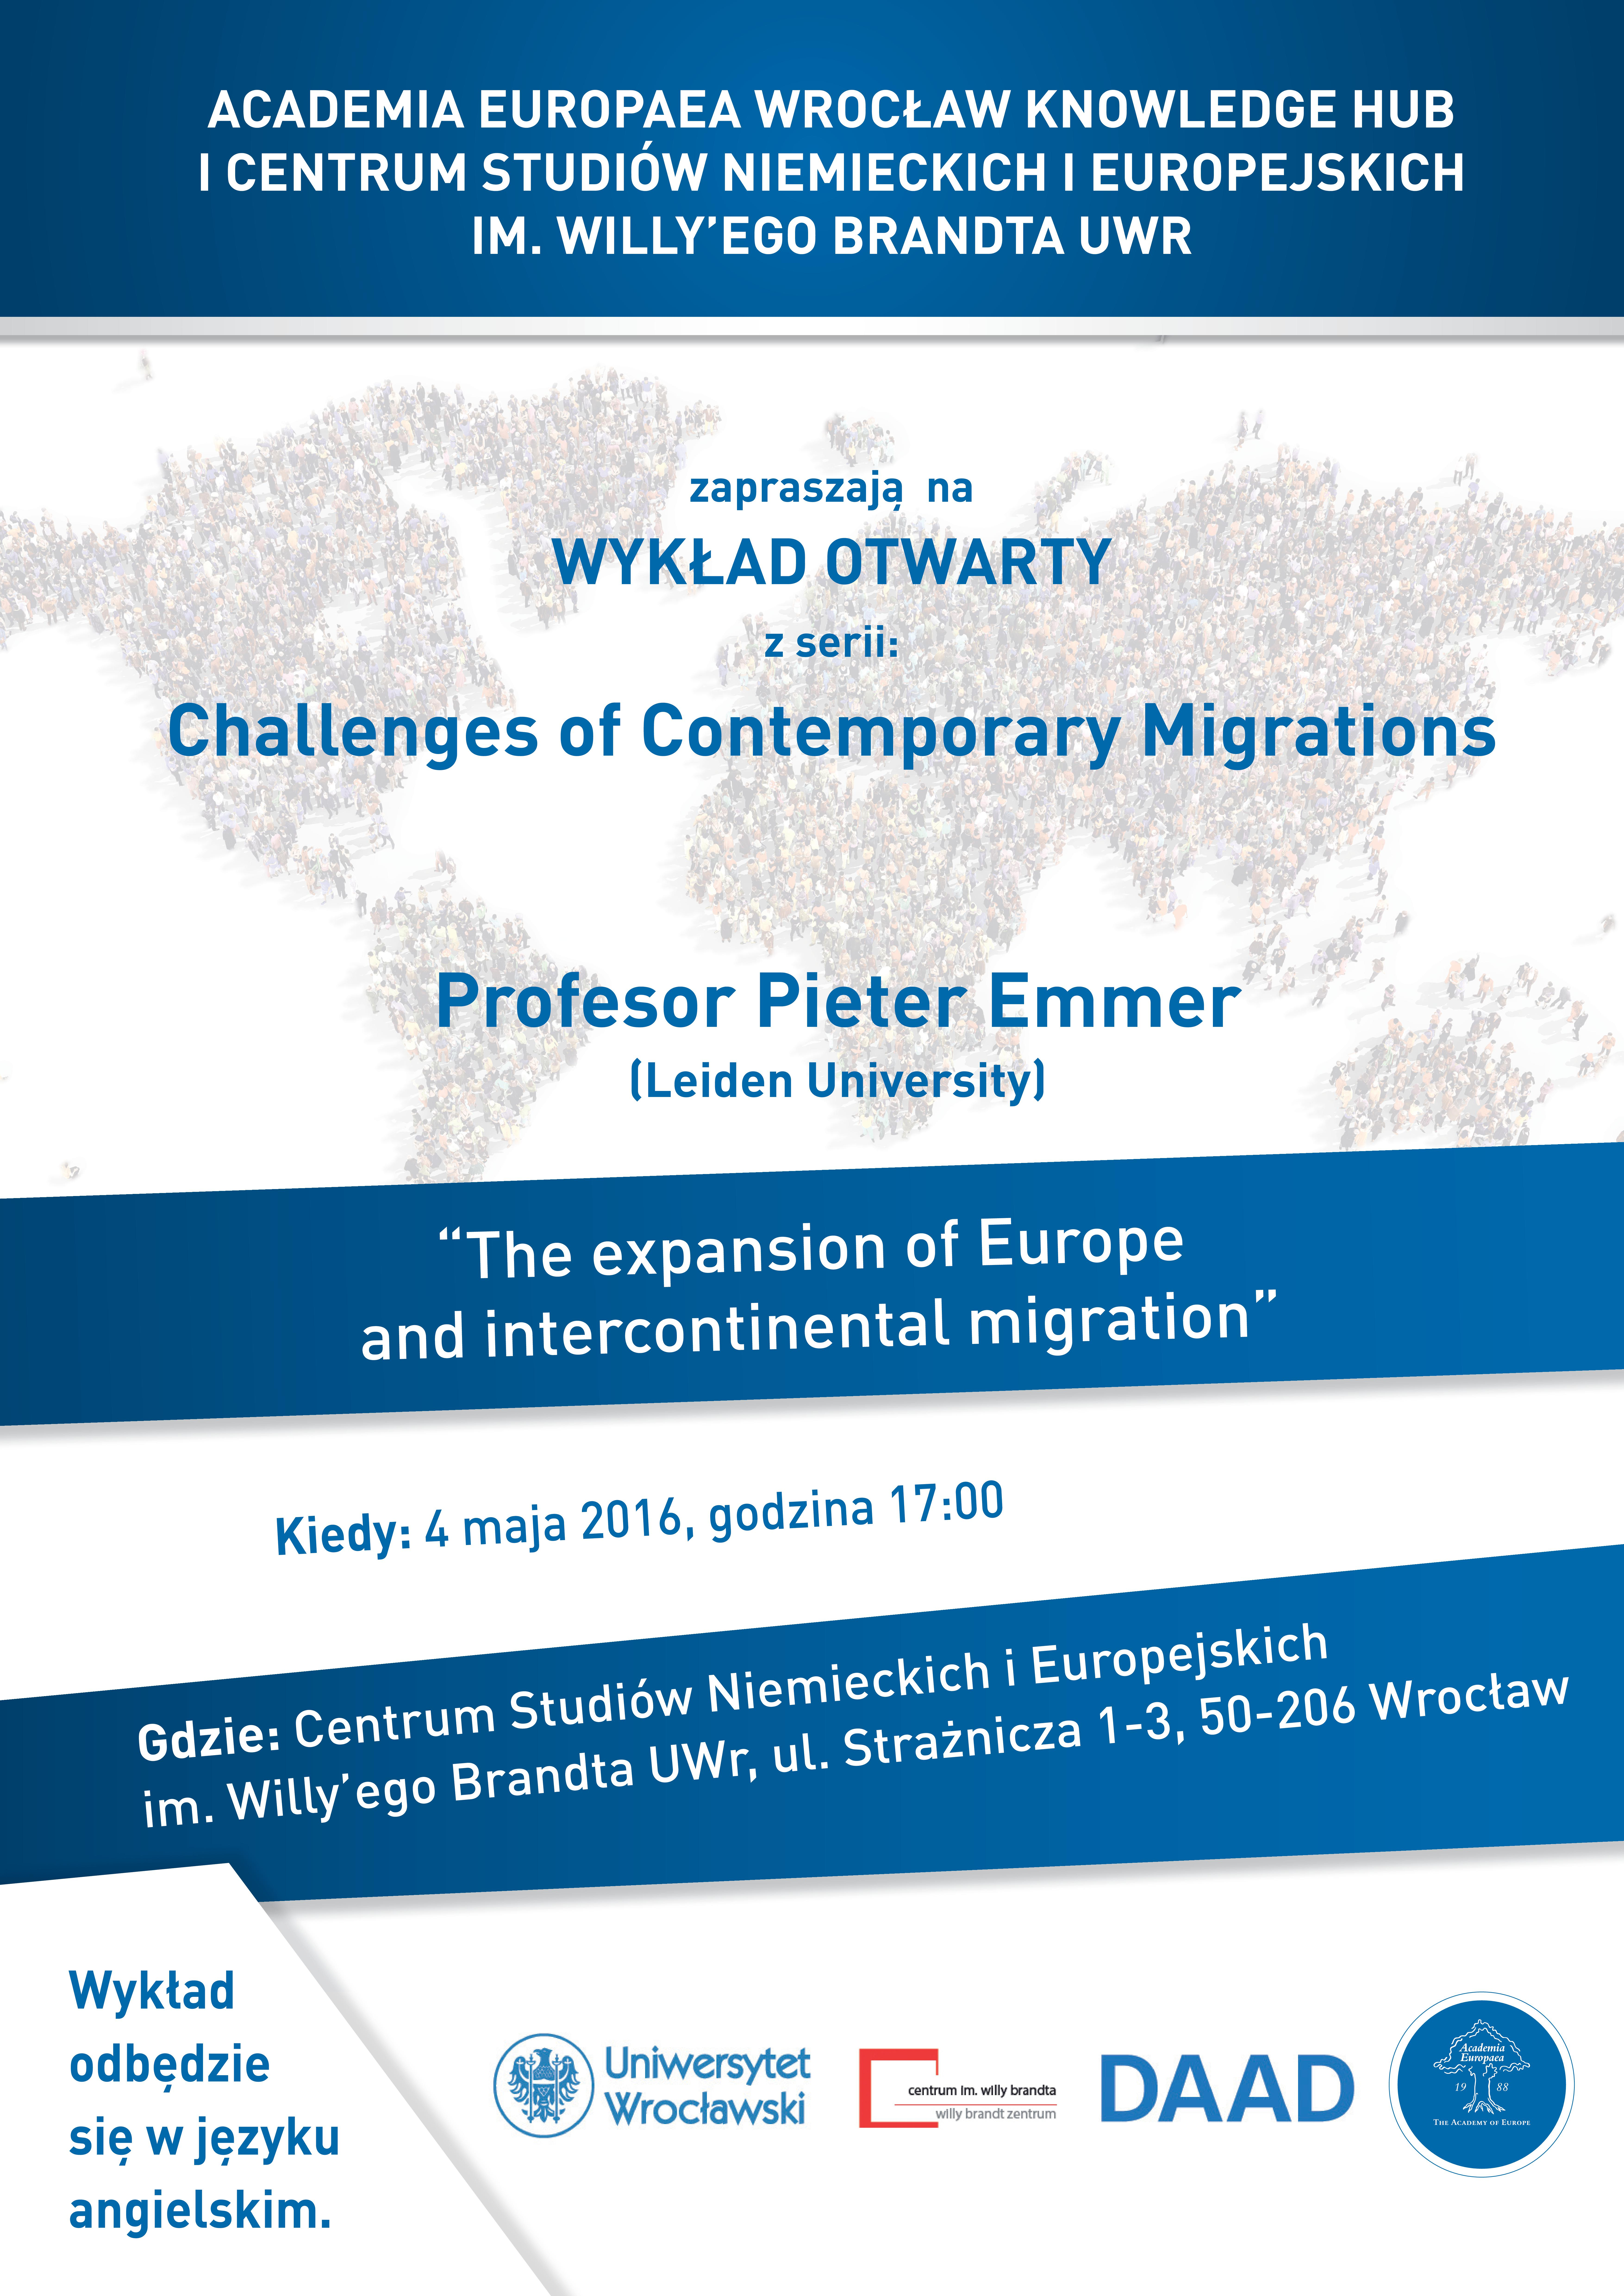 The expansion of Europe and intercontinental migration